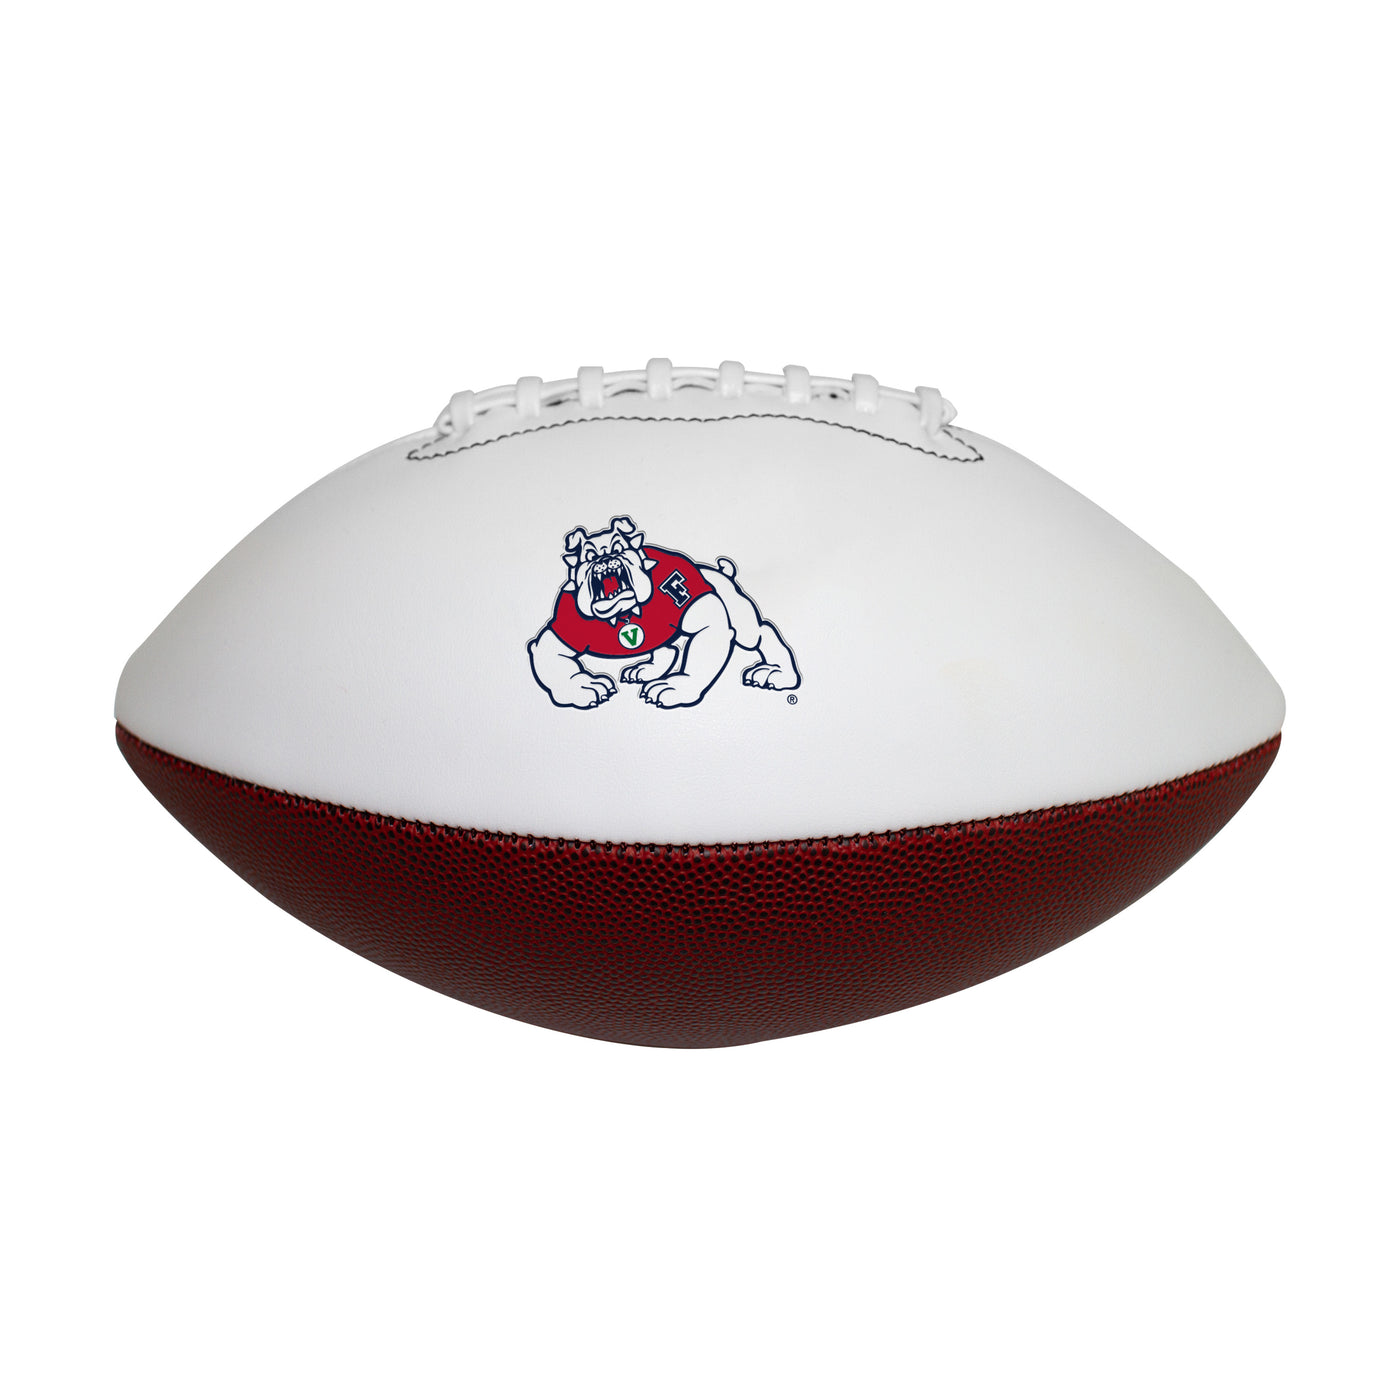 Fresno State Official-Size Autograph Football